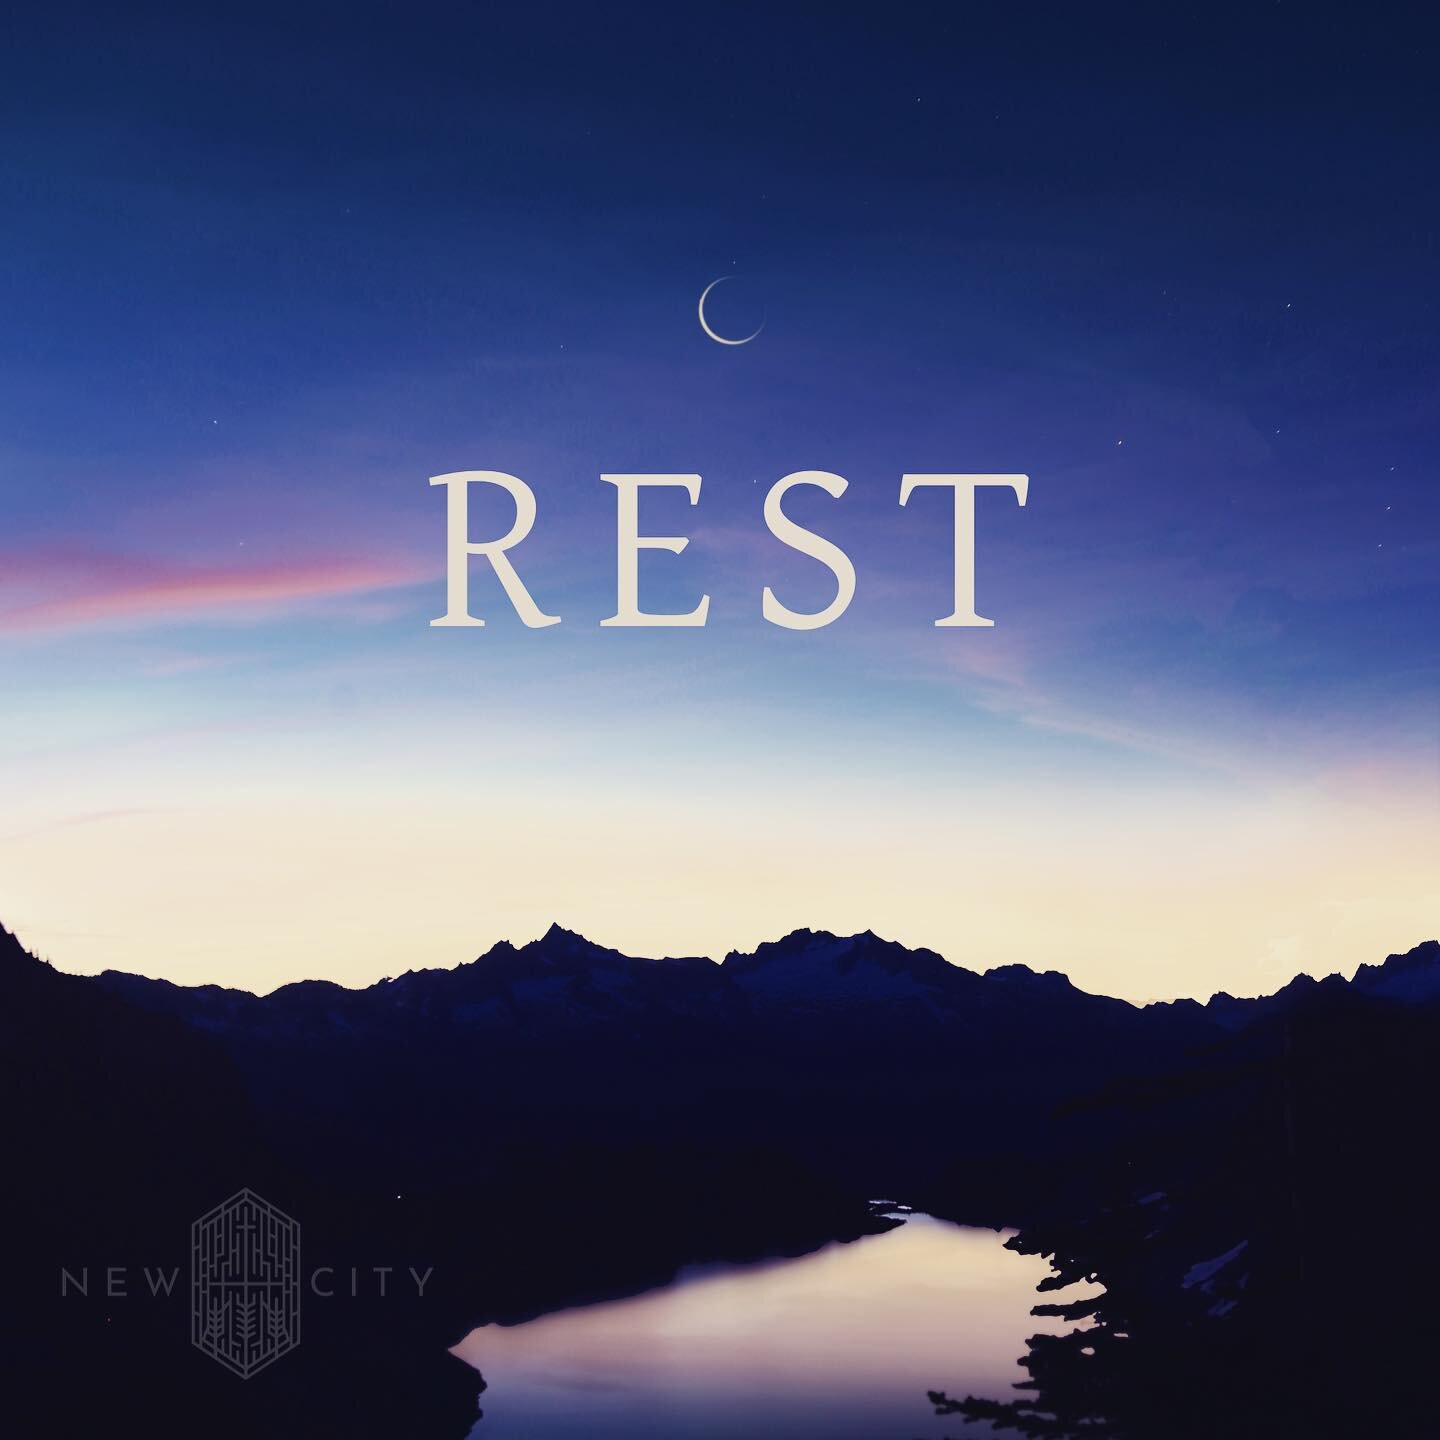 &ldquo;There is some work that can only be accomplished by God in a state of rest.&rdquo; (K. Barth) Is resting (in both body and soul) an overlooked discipline of your life? More this Sunday at 10am / 229 Pecan St. www.newcitypres.org